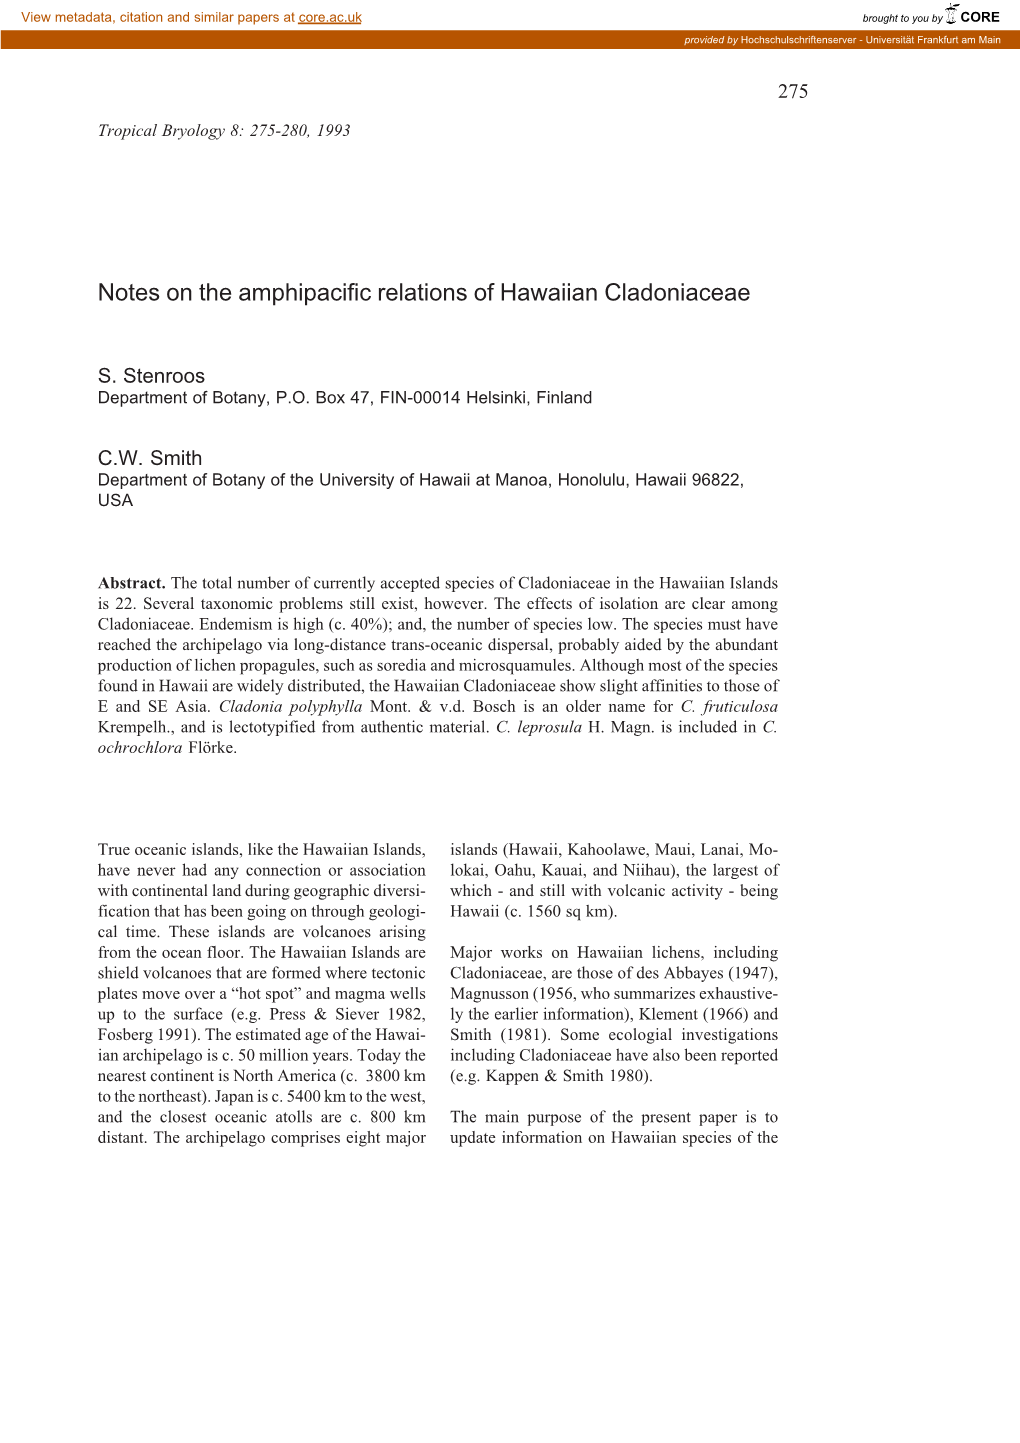 Notes on the Amphipacific Relations of Hawaiian Cladoniaceae